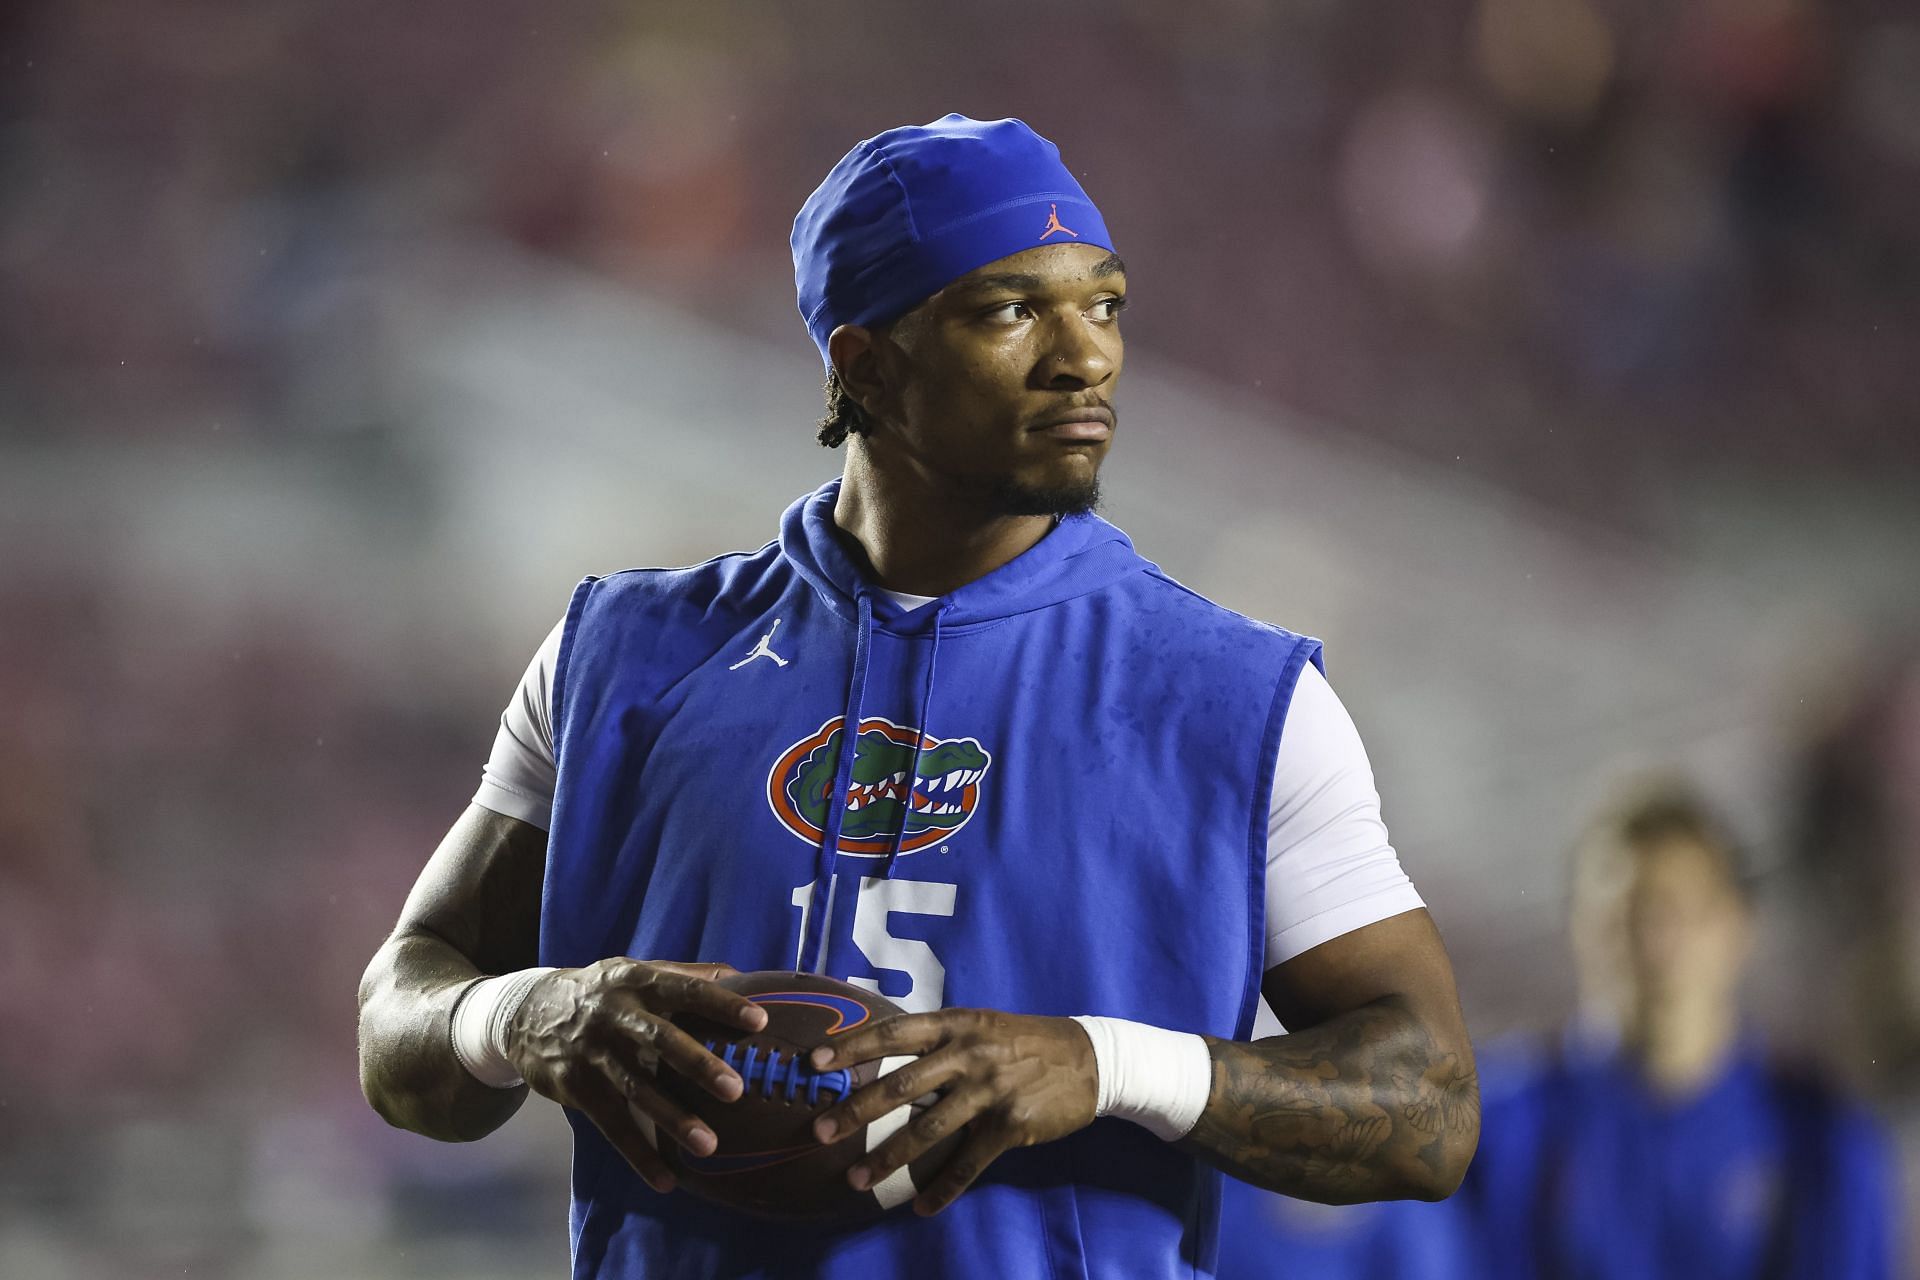 Anthony Richardson of the Florida Gators looks on before the start of a game against the Florida State Seminoles